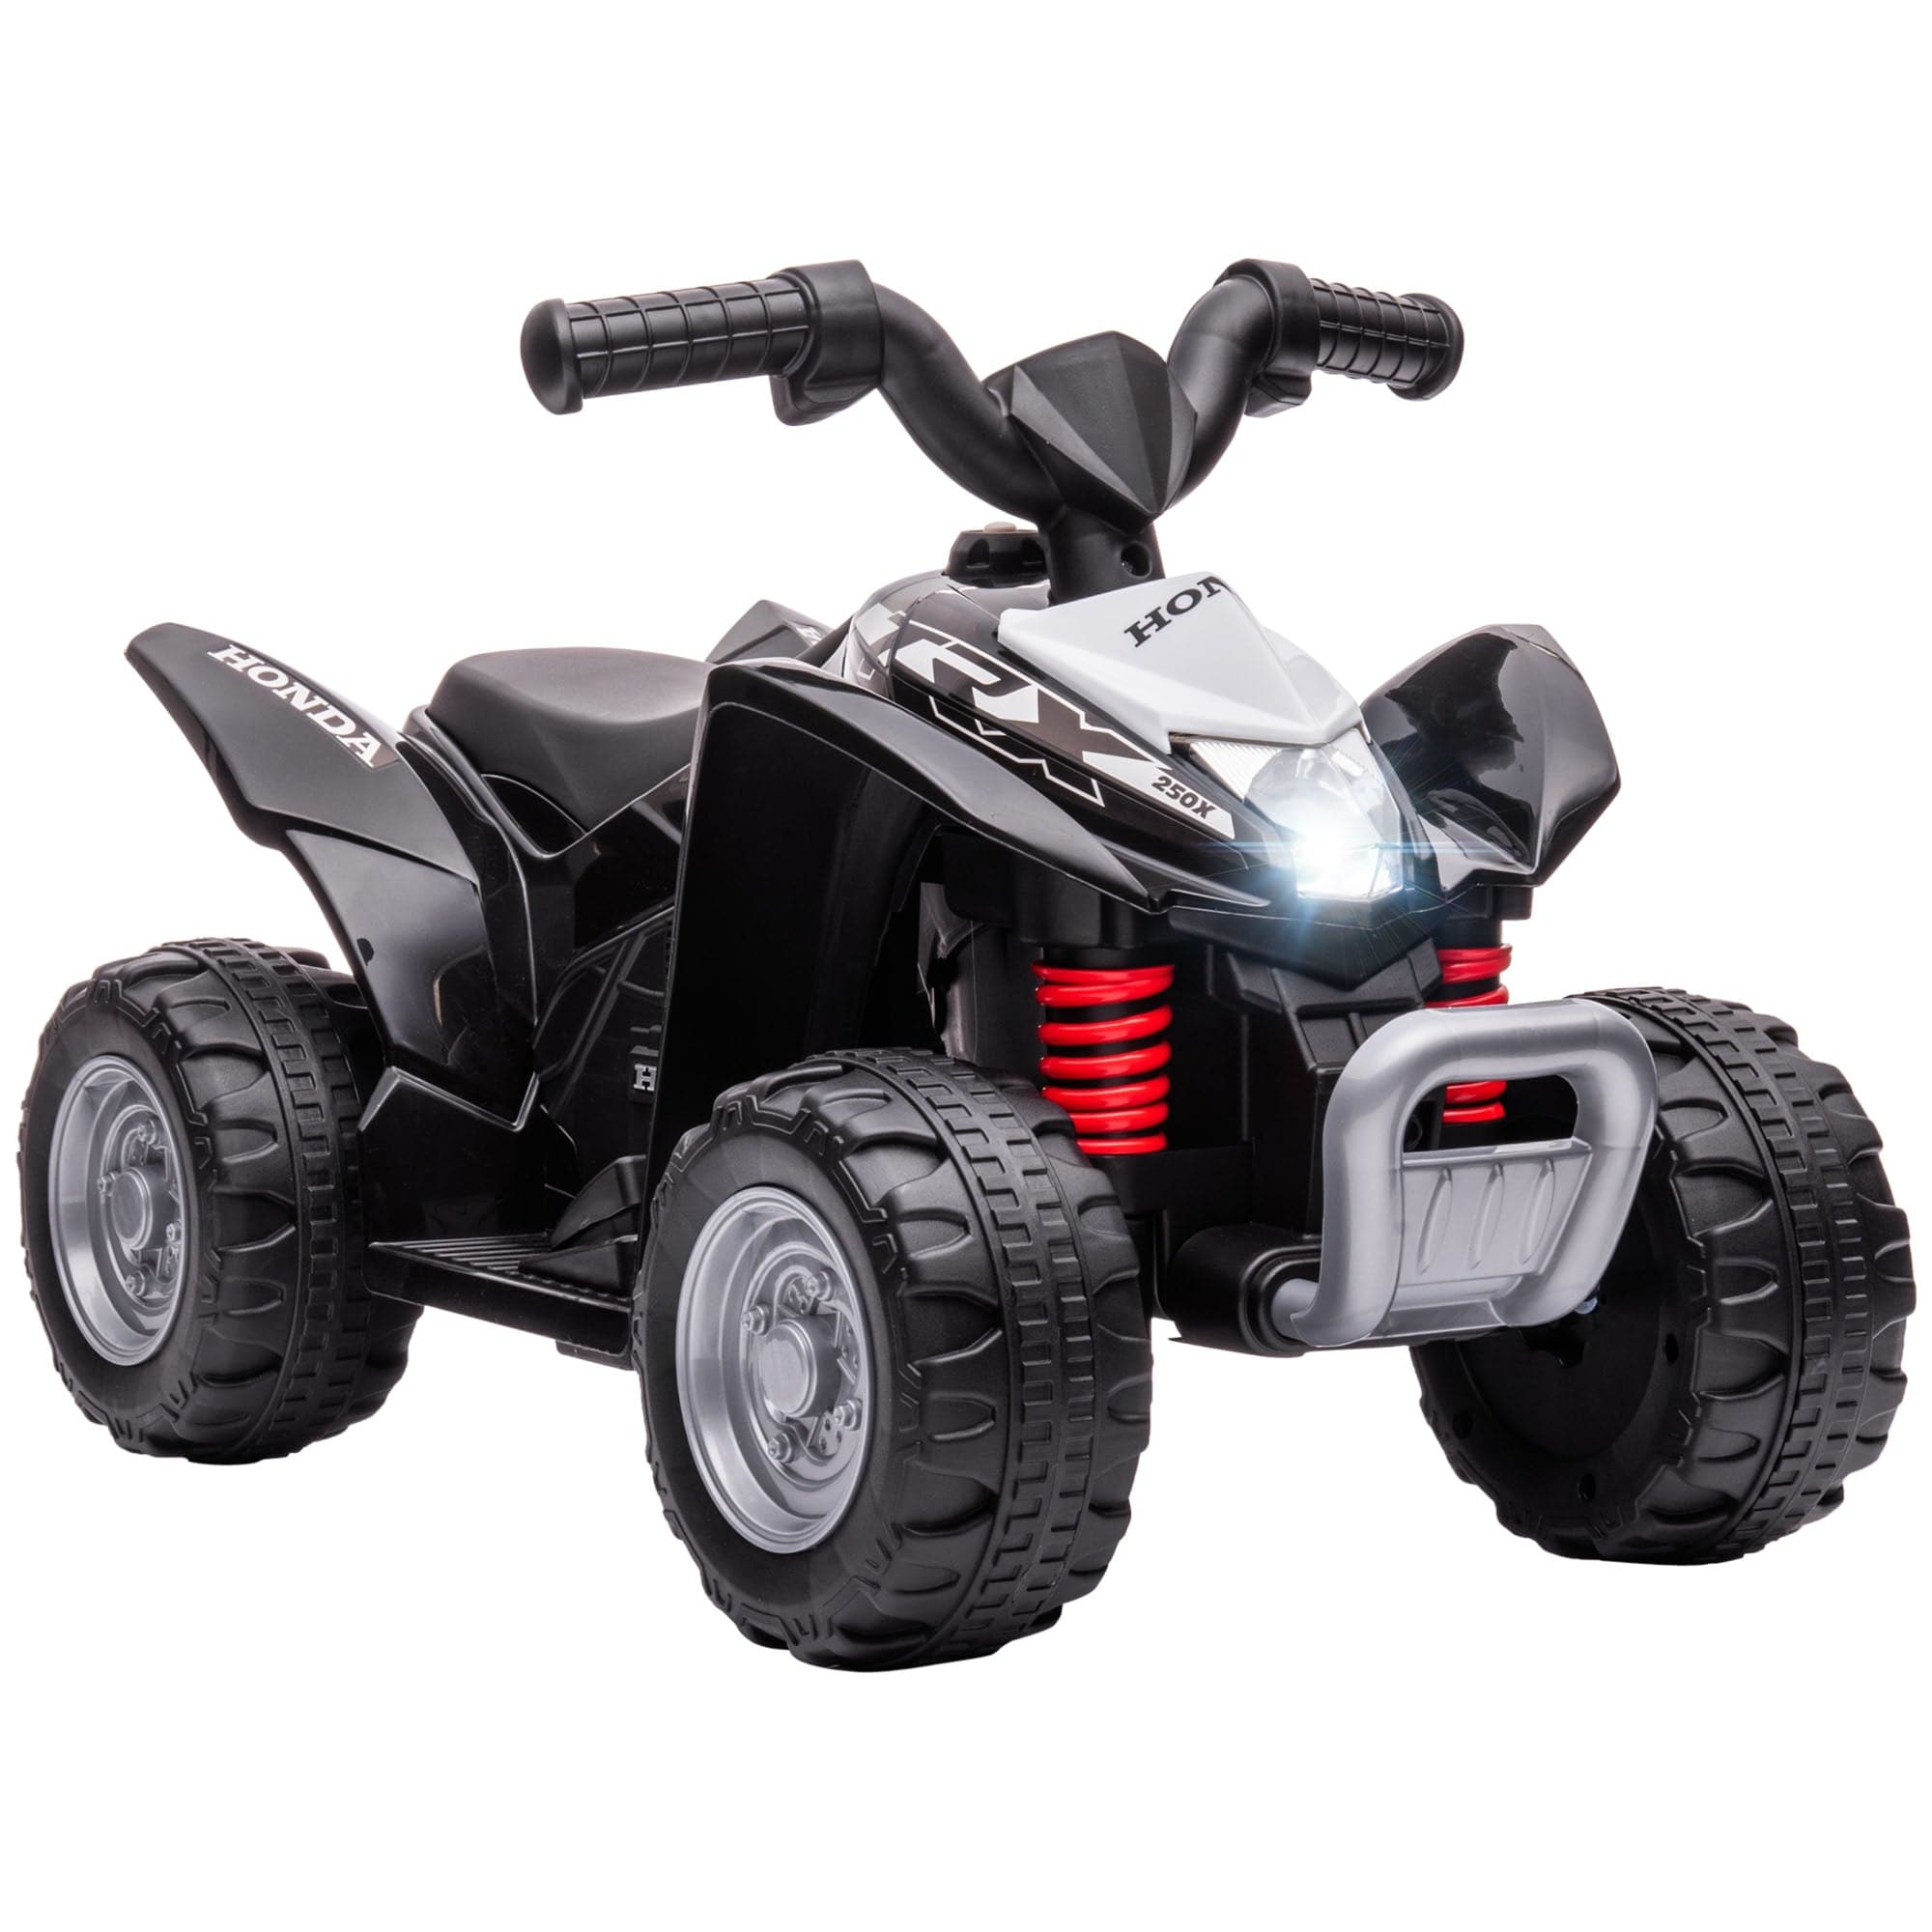 Maplin Plus AIYAPLAY Honda Licensed 6V Electric Ride On Kids Toy ATV Quad Bike with LED Lights & Horn for 1.5-3 Years (Black)